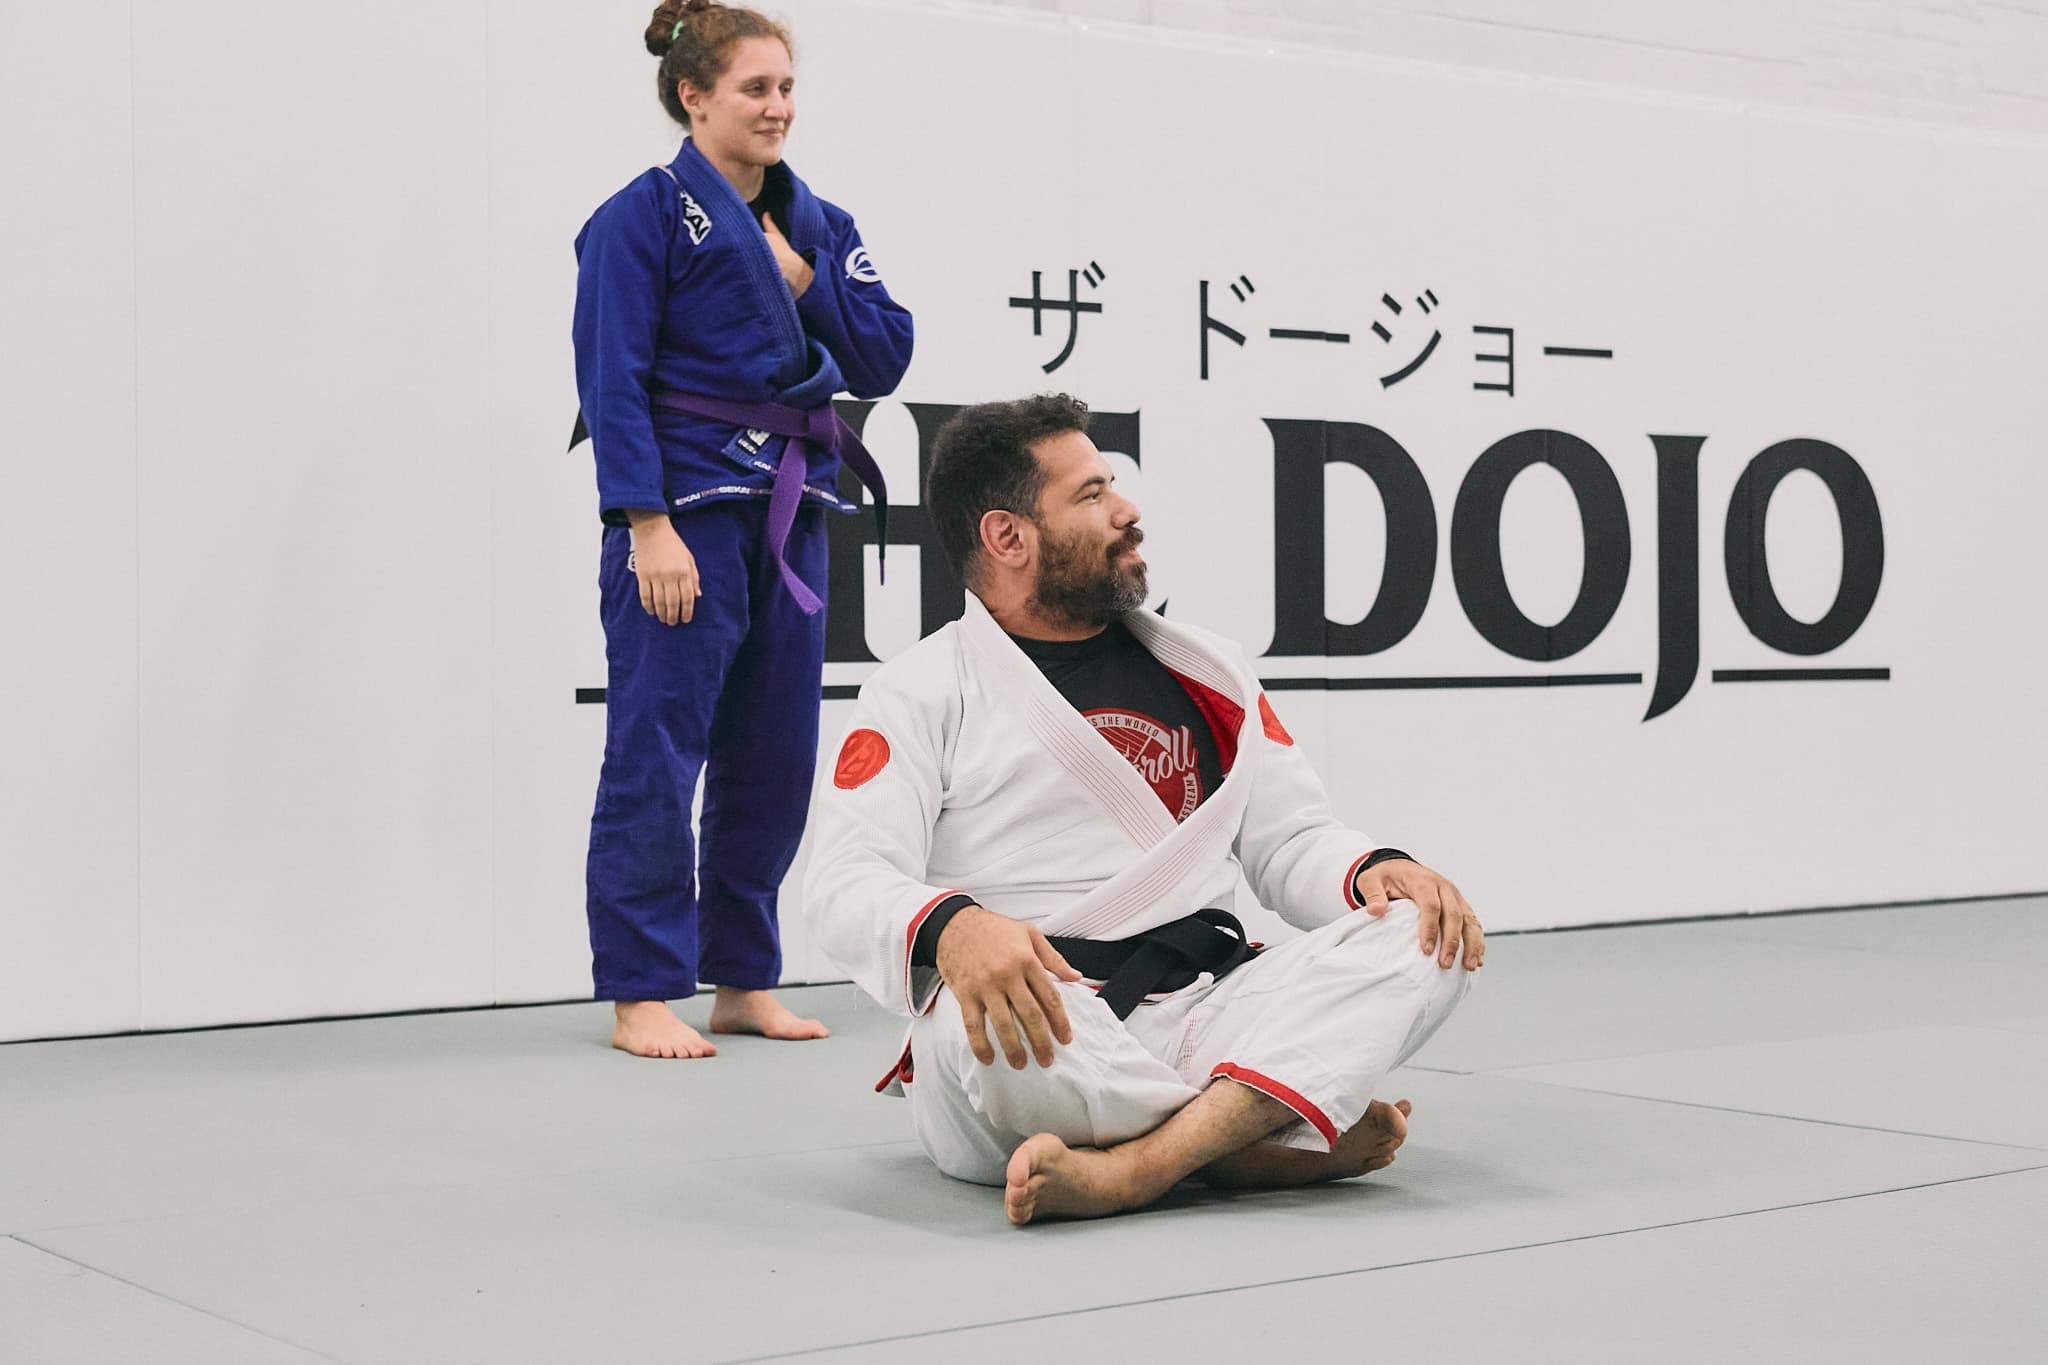 The Dojo NYC About Us